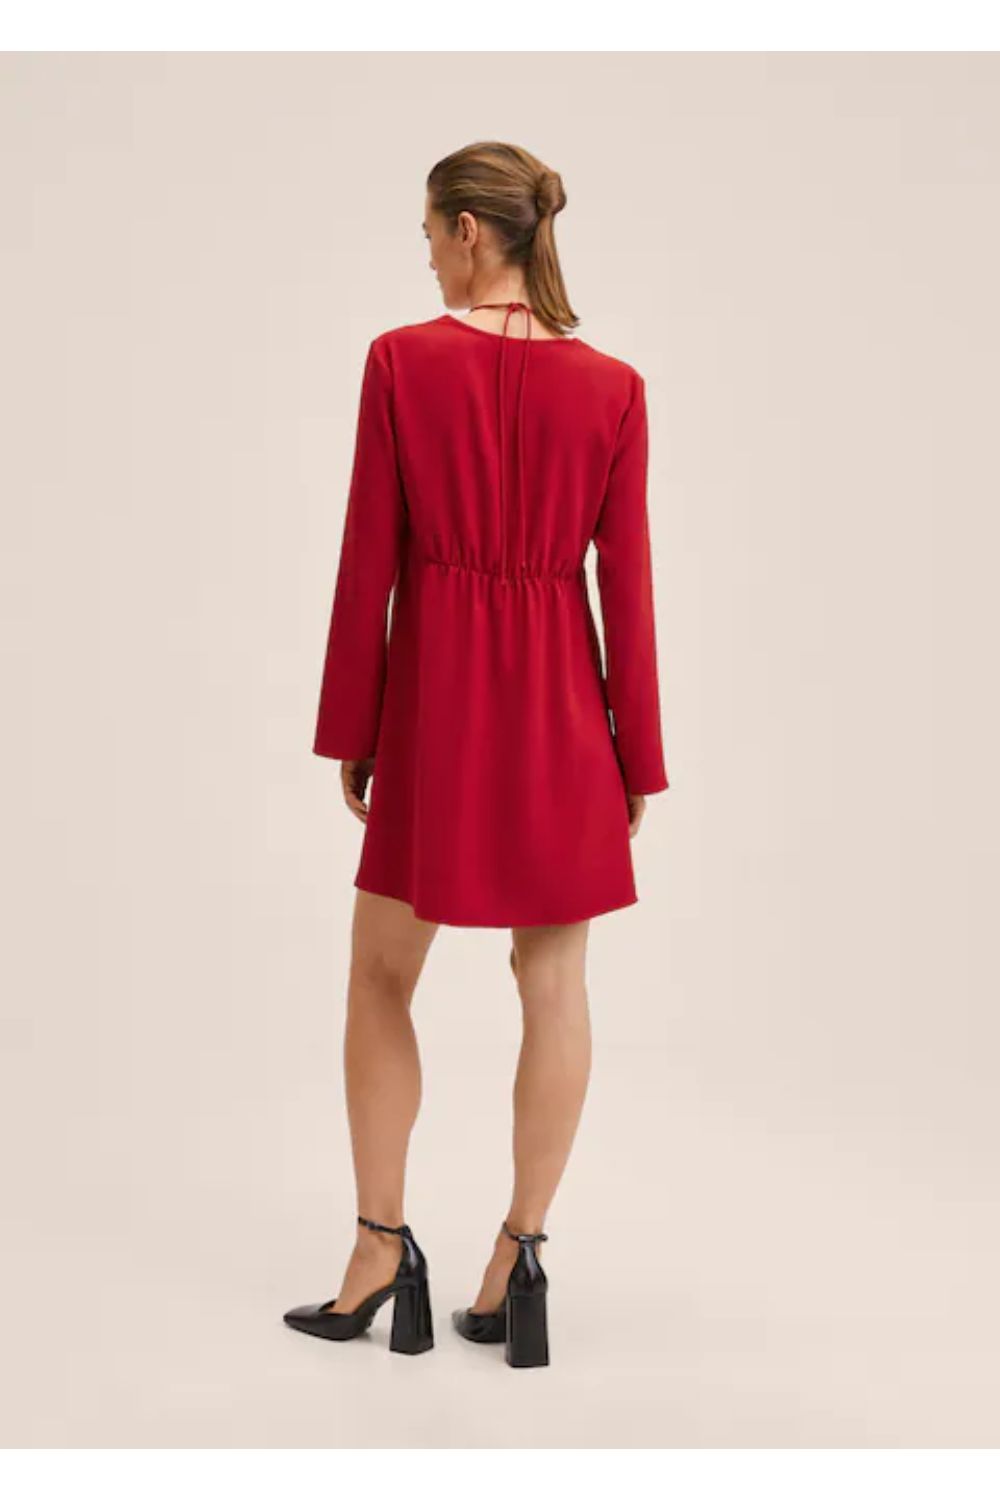 Flowy Red Knotted Lovable Dress